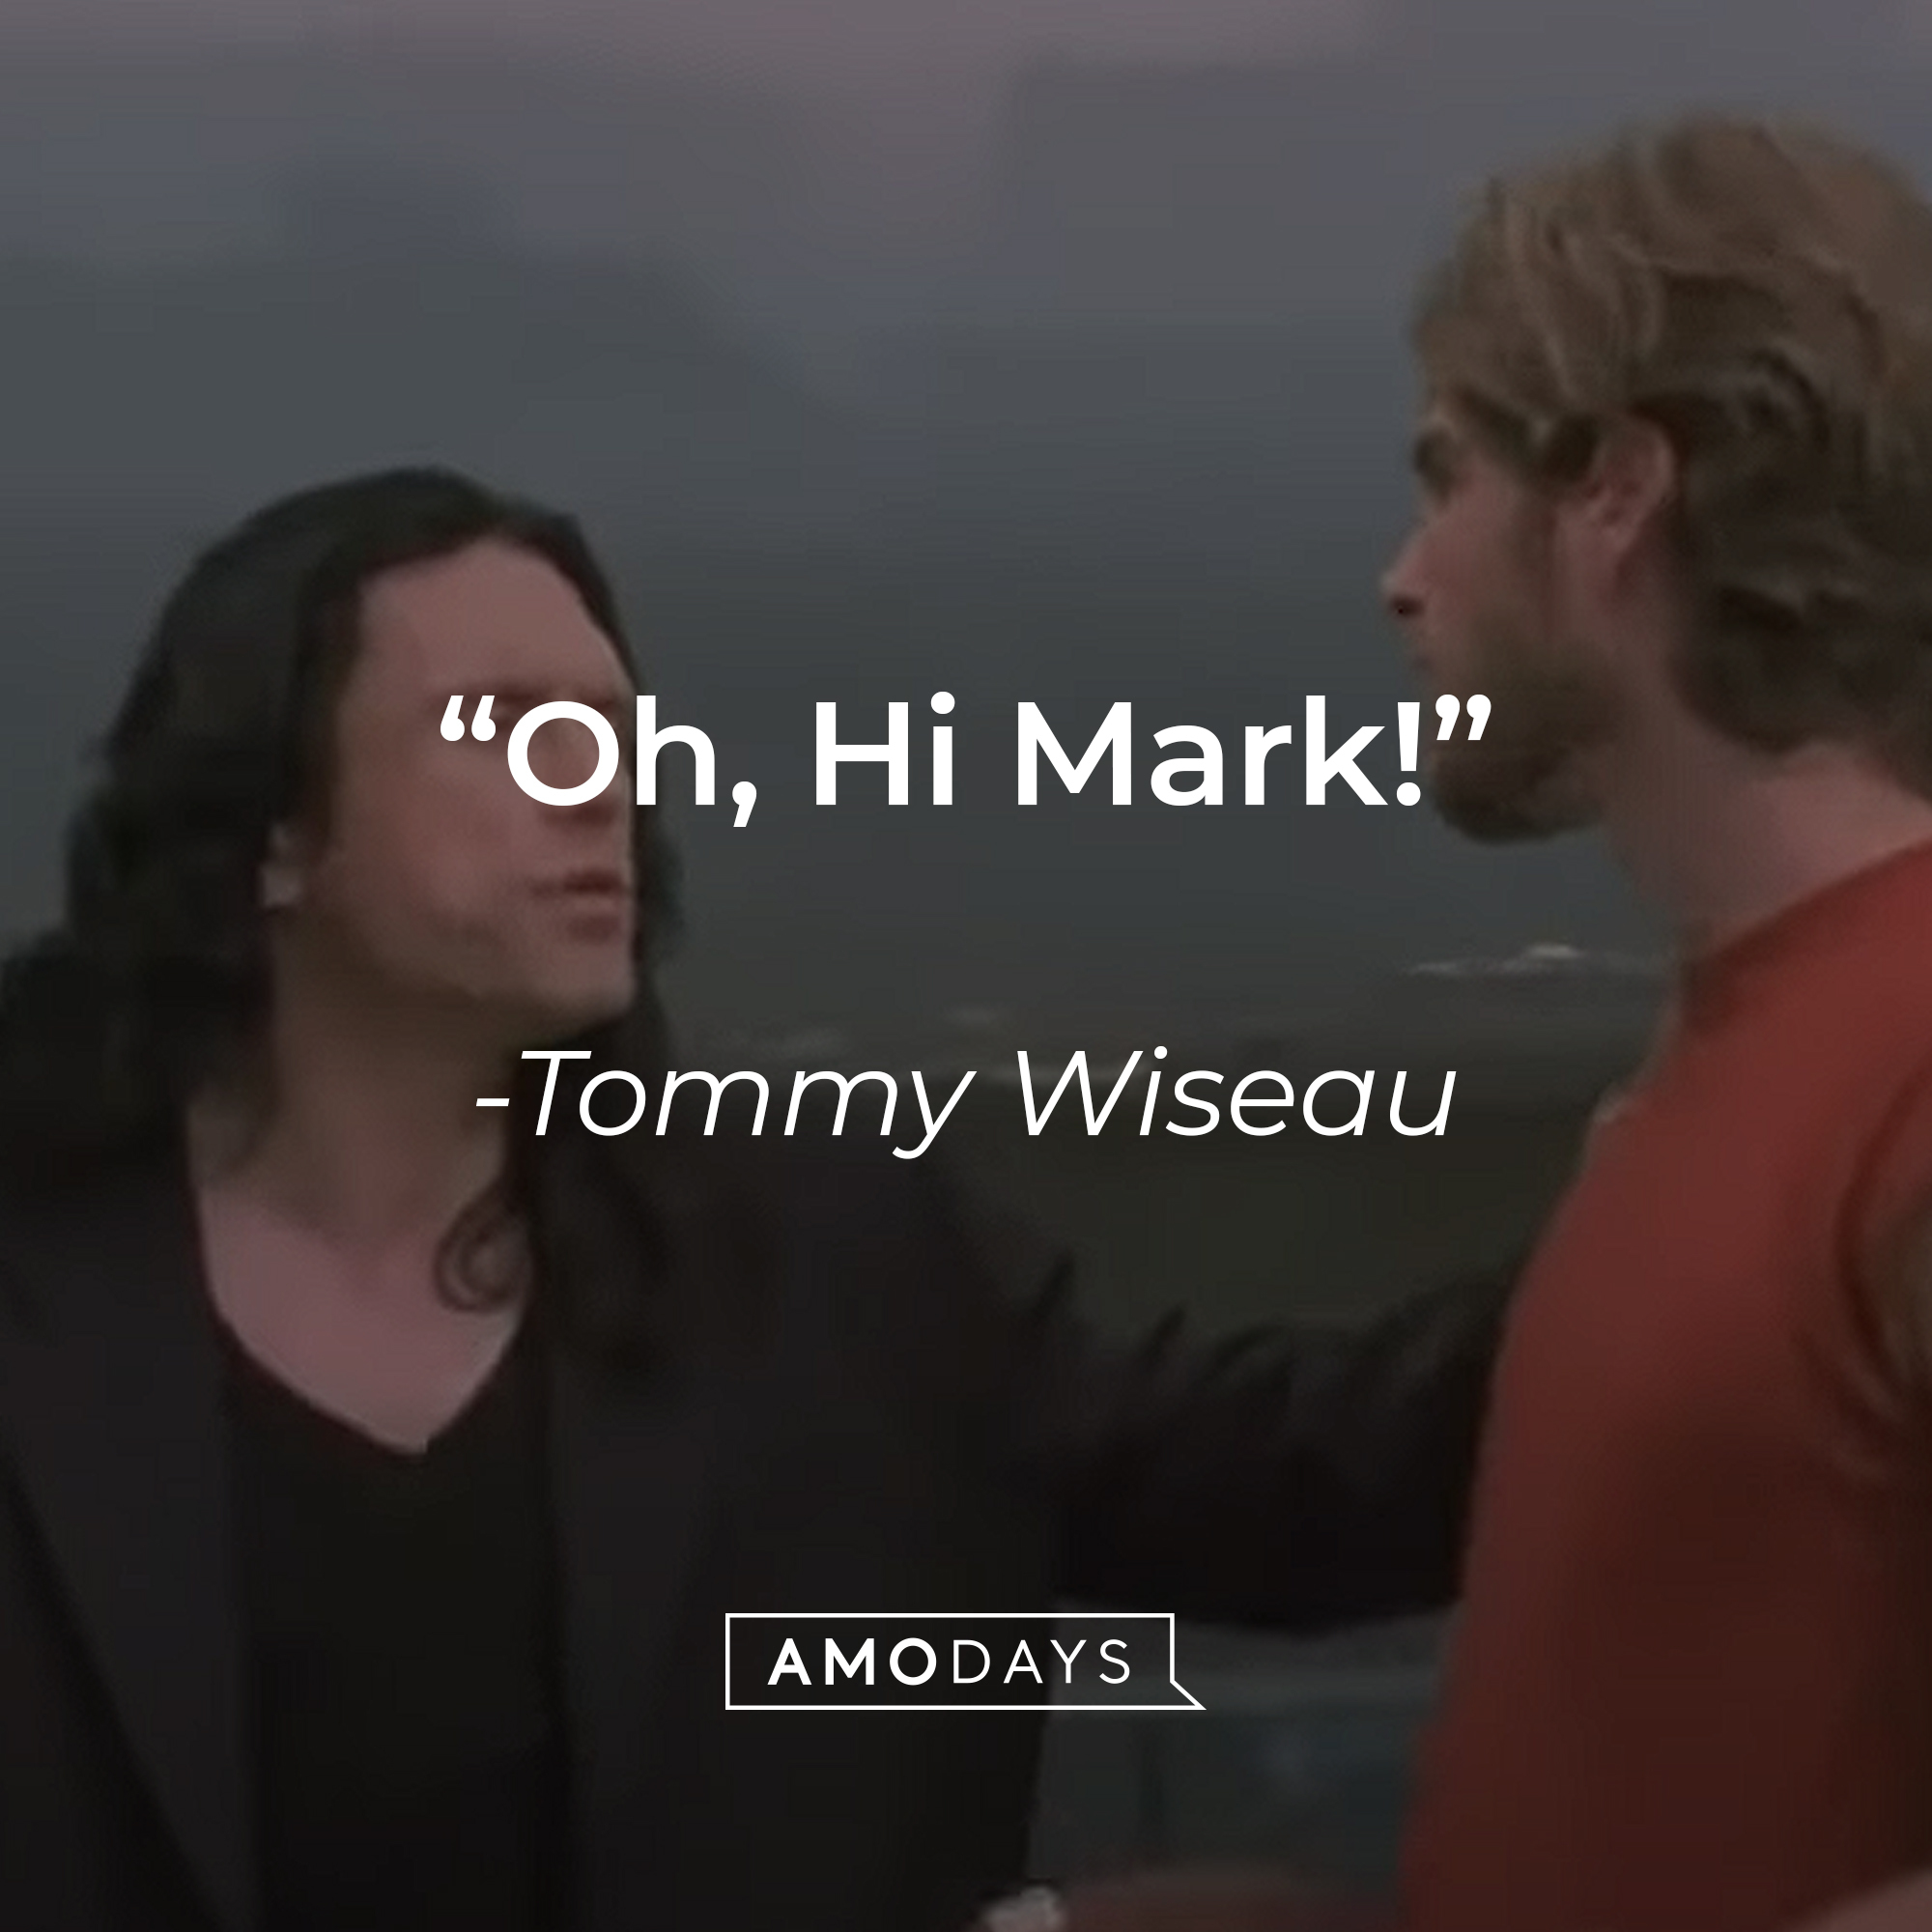 A photo from "The Room" with the quote, "Oh, Hi Mark!" | Source: YouTube/TommyWiseau